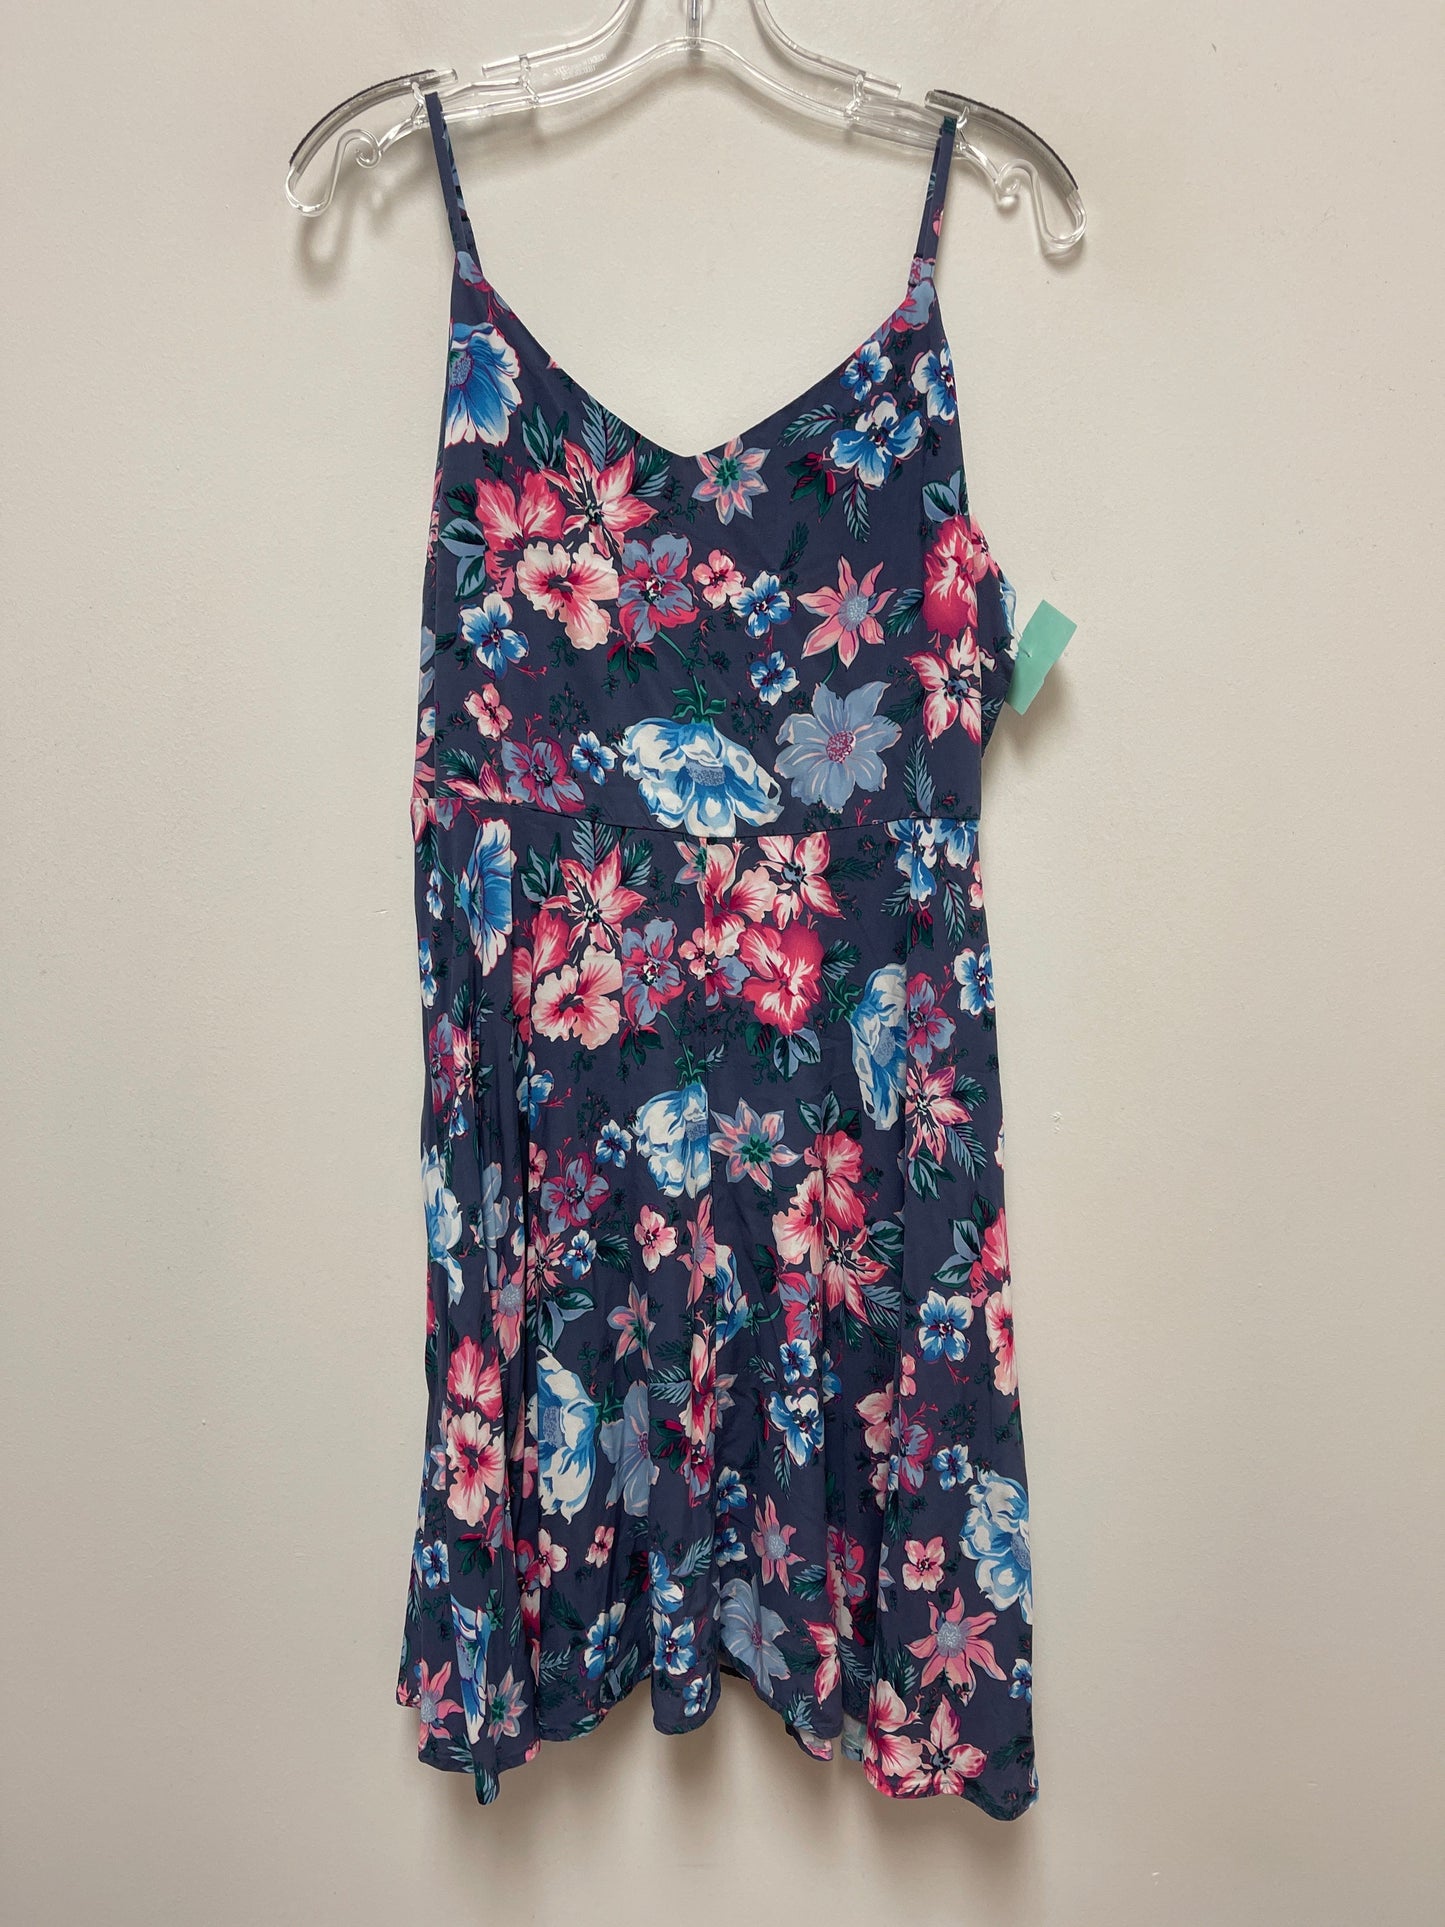 Dress Casual Short By Gap  Size: L